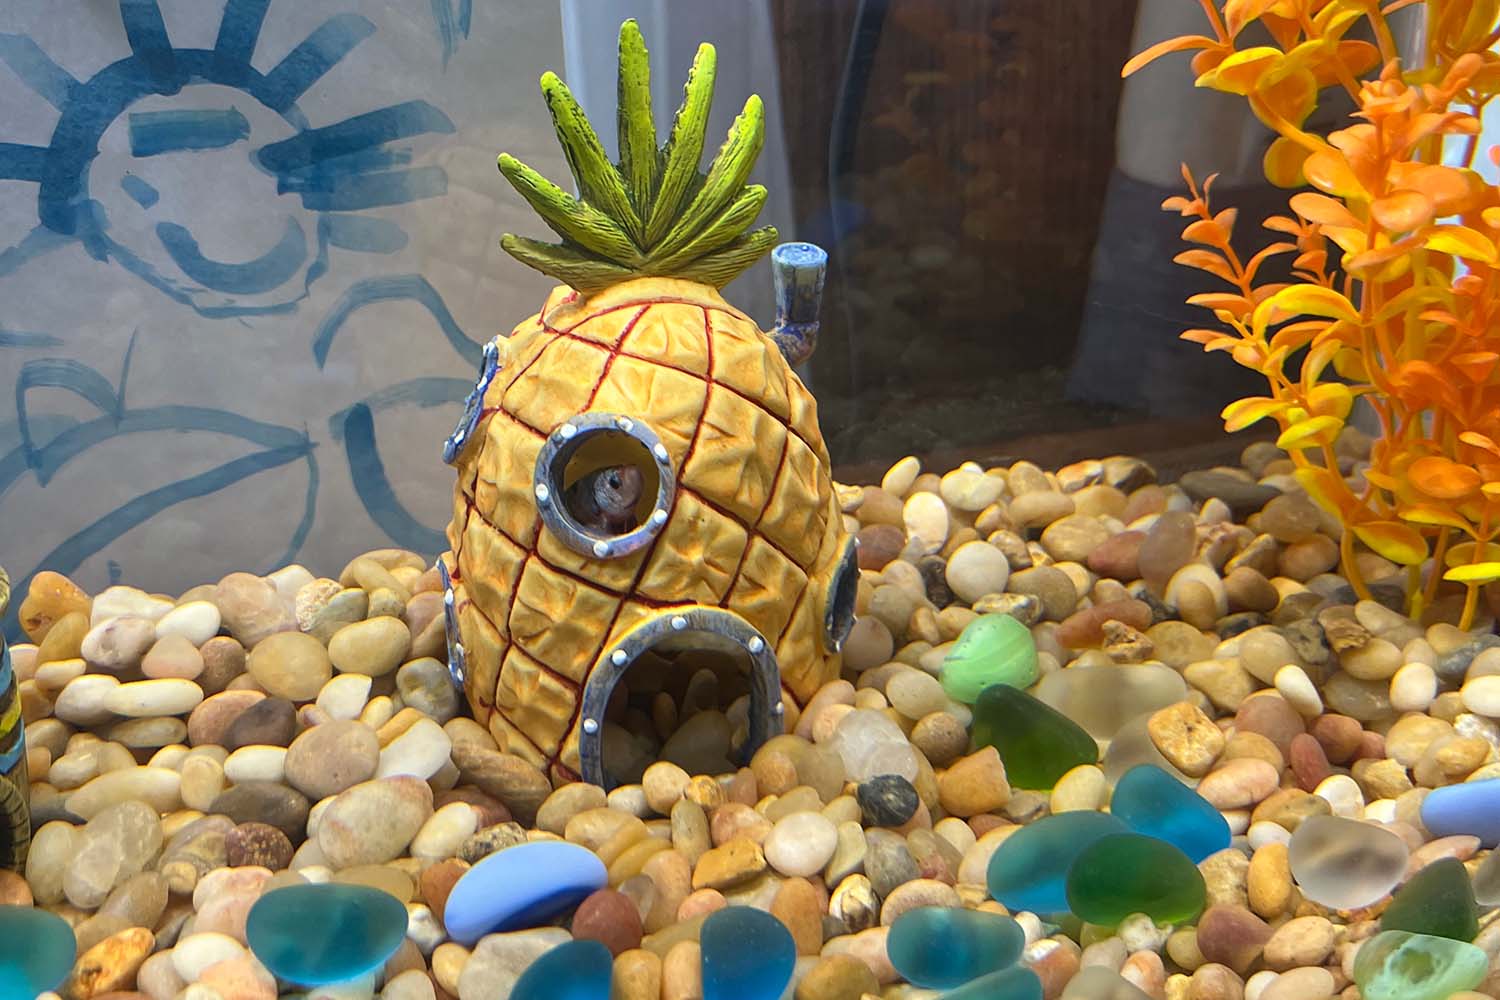 A fish peeking out the window of a whimsical pineapple submarine in a fish tank filled with colorful rocks and seashells.